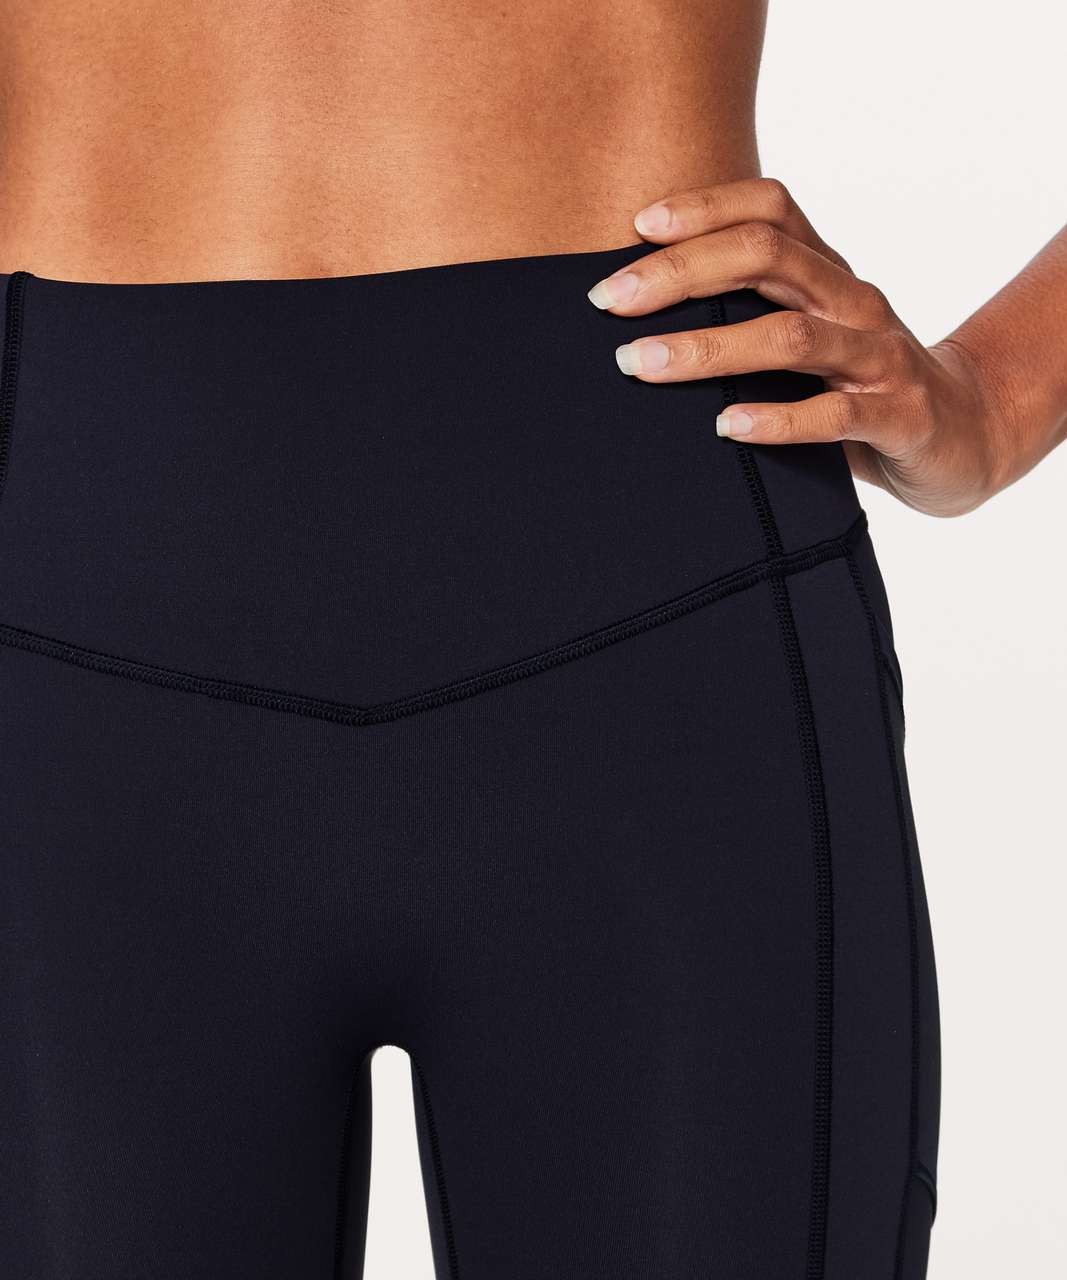 All The Right Places Crop 23 Lululemon Athletica